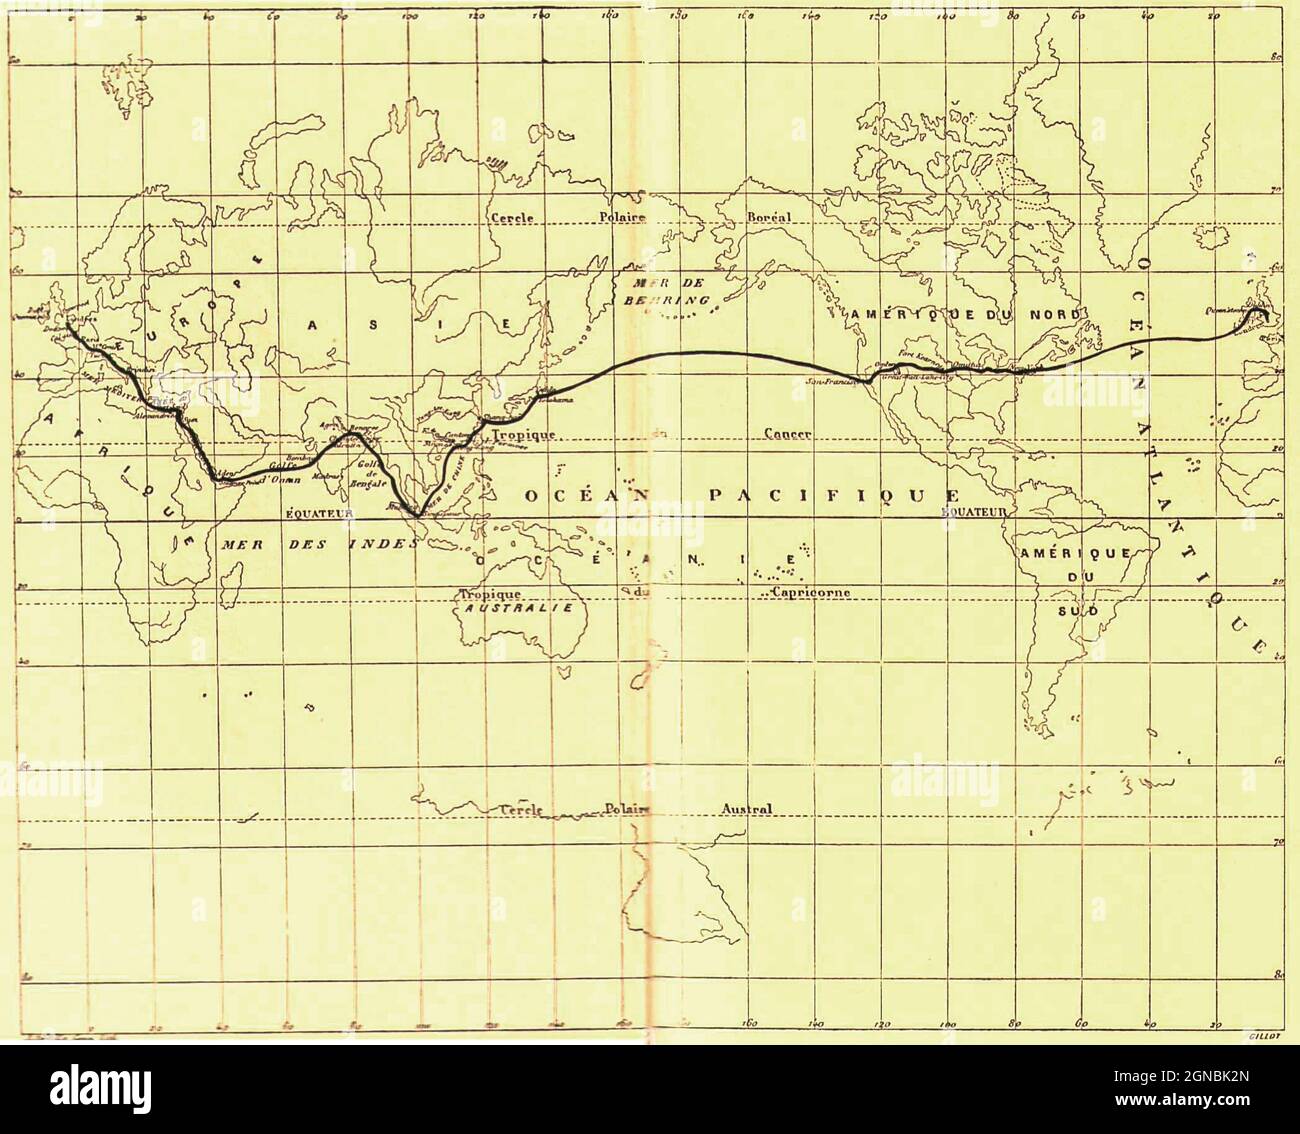 Map of the Voyage from the book ' Around the world in eighty days ' by Jules Verne (1828-1905) Translated by Geo. M. Towle, Published in Boston by James. R. Osgood & Co. 1873 First US Edition Stock Photo